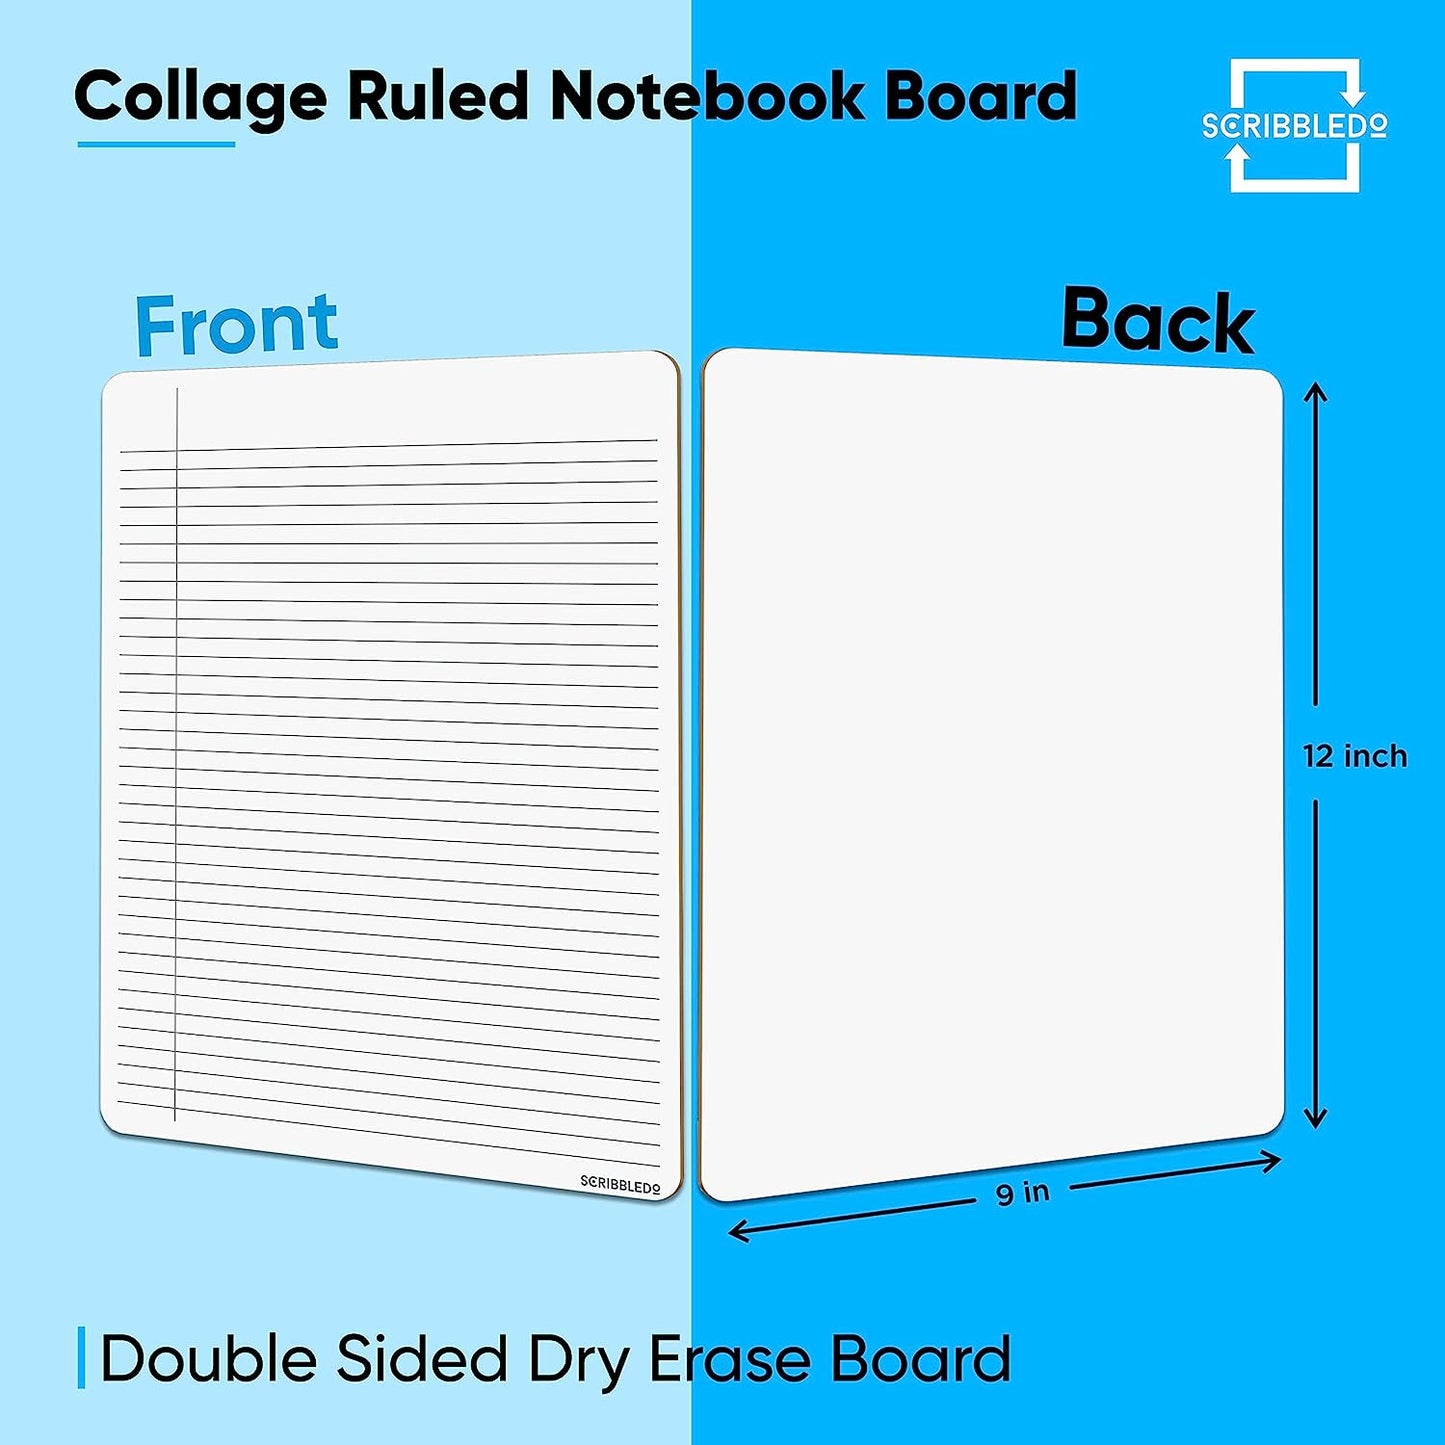 Notebook College Ruled Lined Board 9"x12"